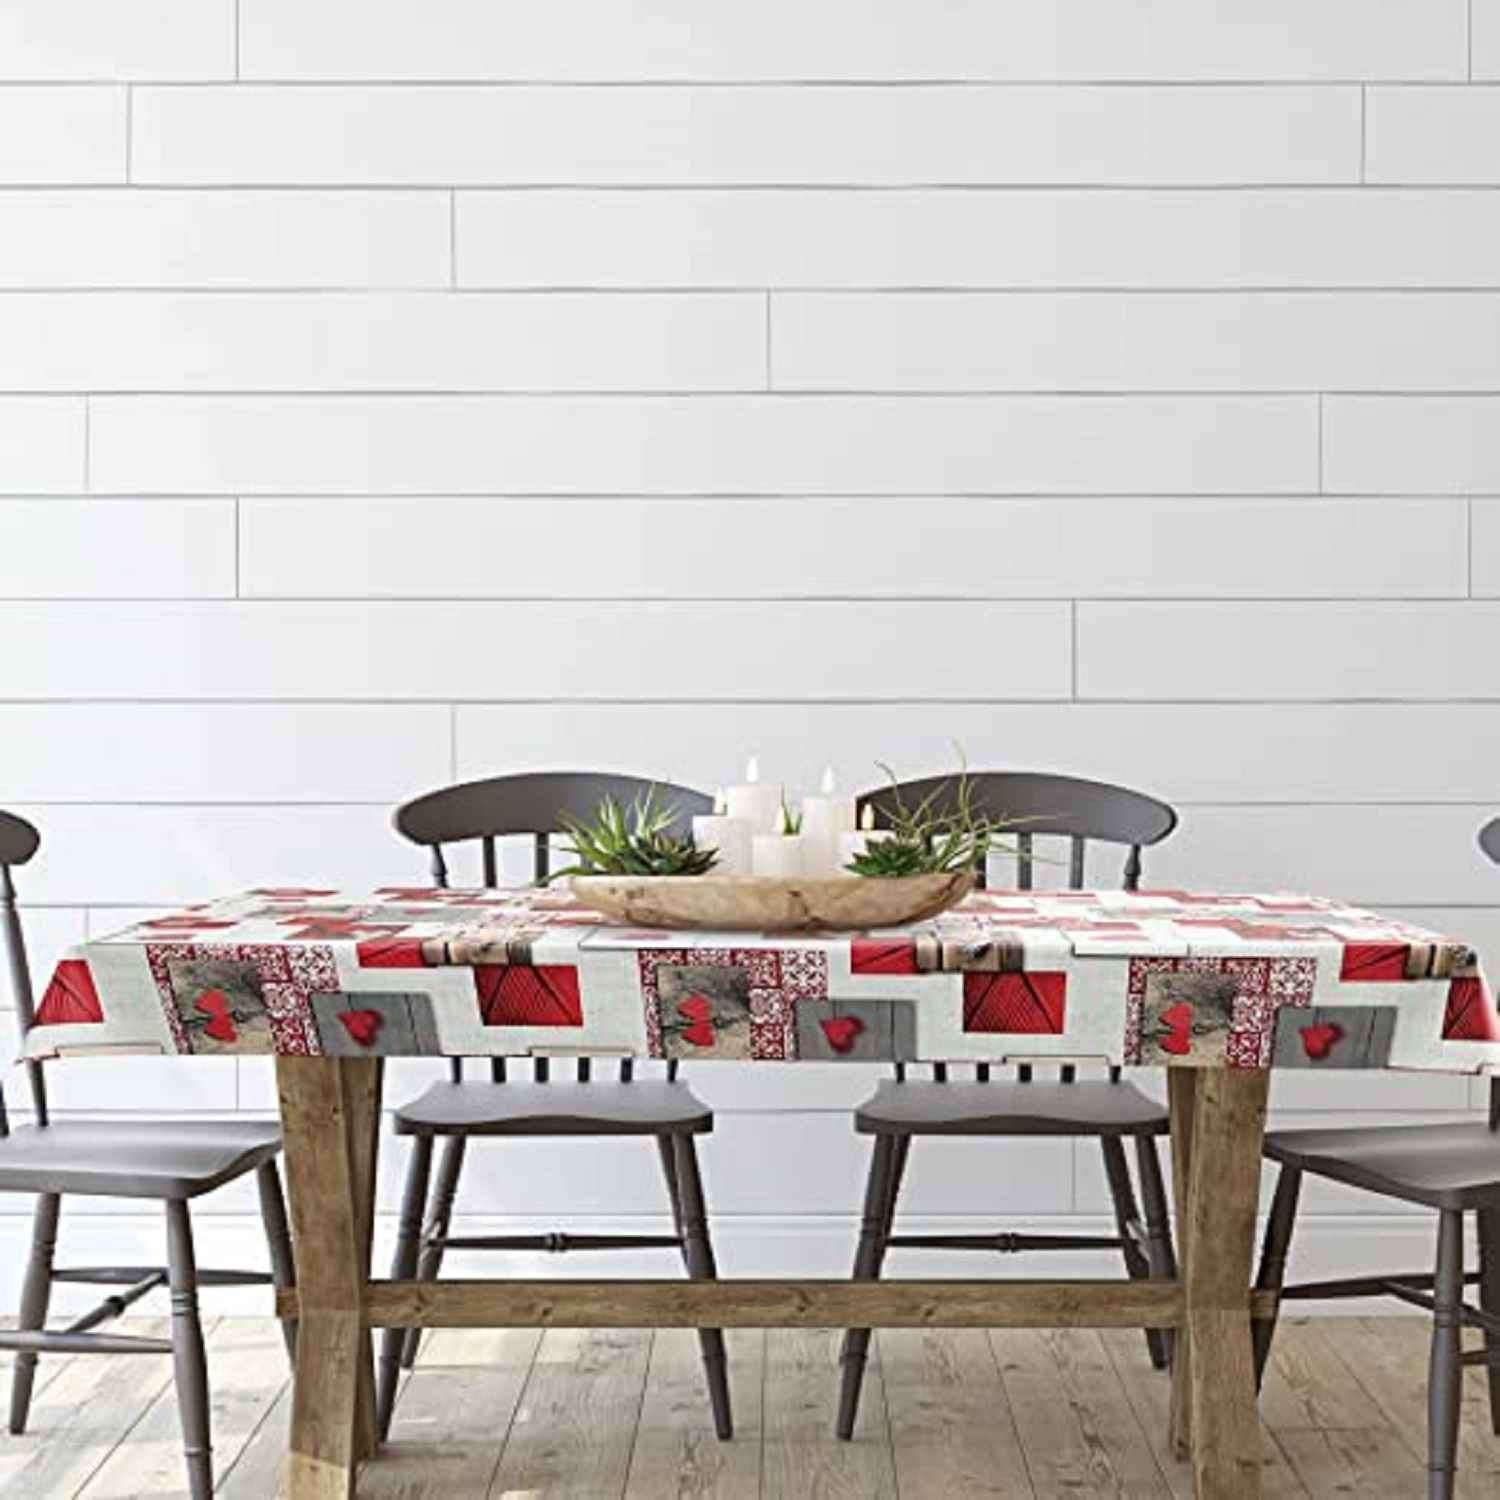 Printed Table Cloth, Pvc With Polyester Backing, Rf10205 - Highly Durable Design, Table Cover For Dining Room Kitchen Birthday Parties Holiday Wedding Indoor Outside, Rectangle, 1.37X20M/Roll